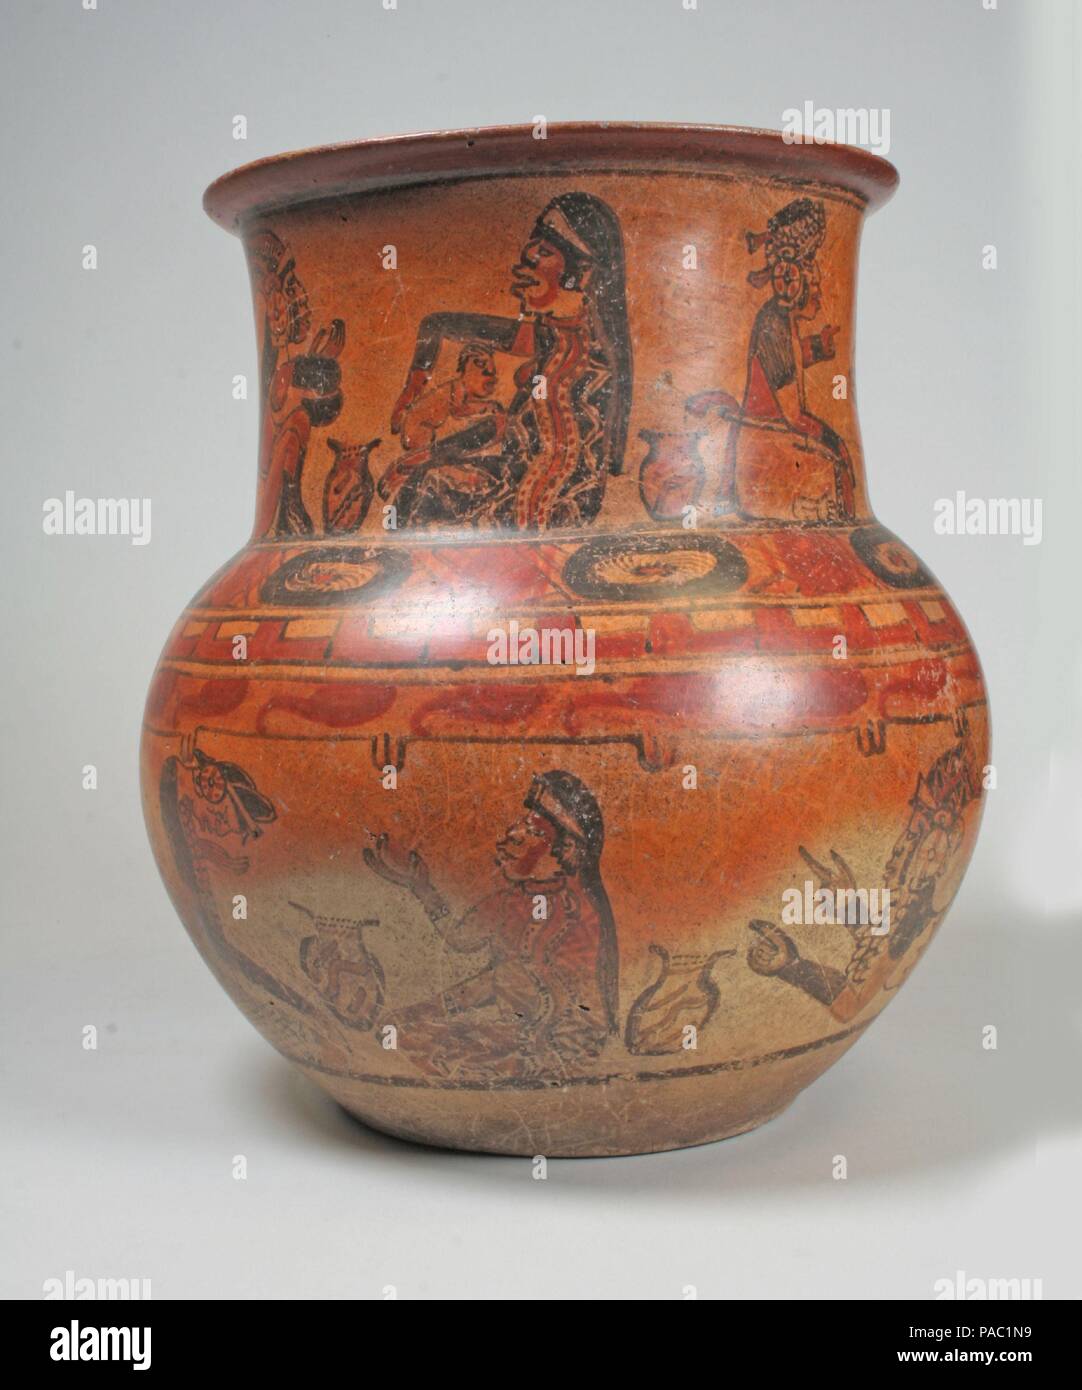 Jar, Ritual Scenes. Culture: Maya. Dimensions: H. 11 1/2 in. x Diam. 12 in. (29.2 x 30.5 cm). Date: 8th-9th century.  The Classic Maya depicted many scenes of ritual imbibing of alcohol through enemas, and on this jar, several such scenes unfold around an upper and lower register. In paired-figure scenes, three around the neck and four around the body of the jar, a woman is shown taking care of a child, preparing a mixture in an enema bladder or gourd, and helping a male administer an enema to himself. The characters are painted in red, orange, and black, on a light orange background. The outf Stock Photo